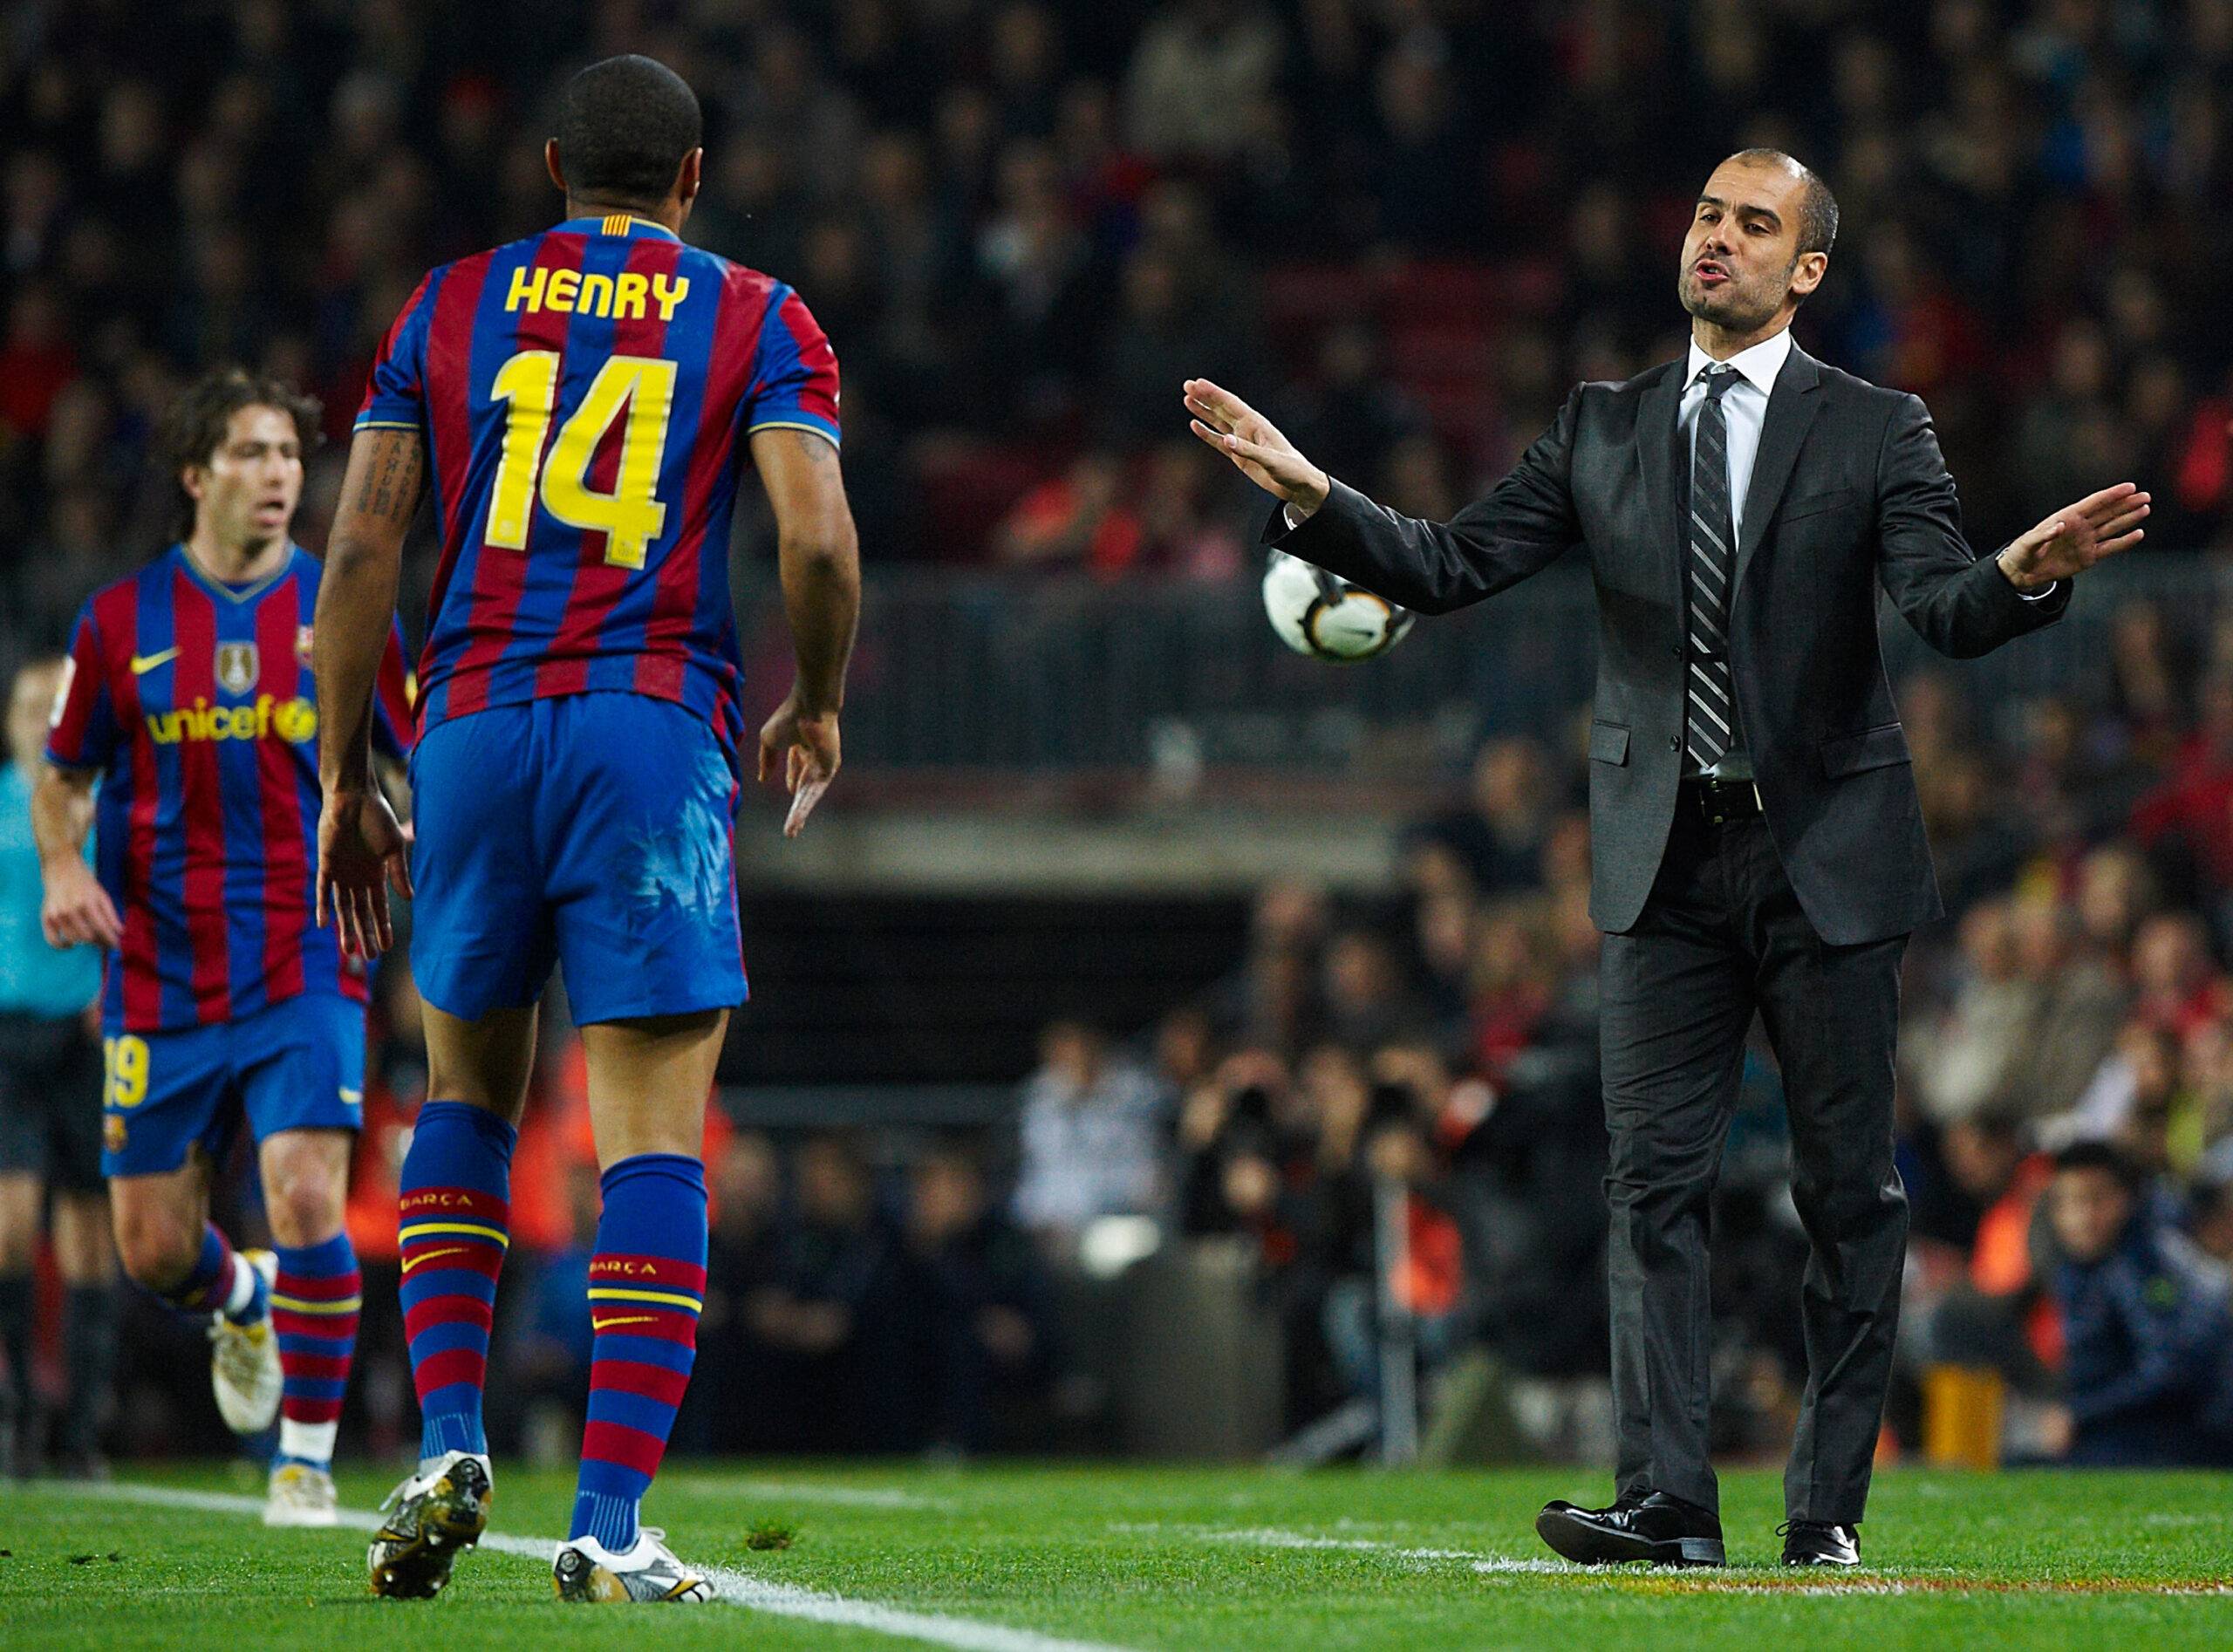 Pep Guardiola speaking to Thierry Henry from touchline at Barcelona